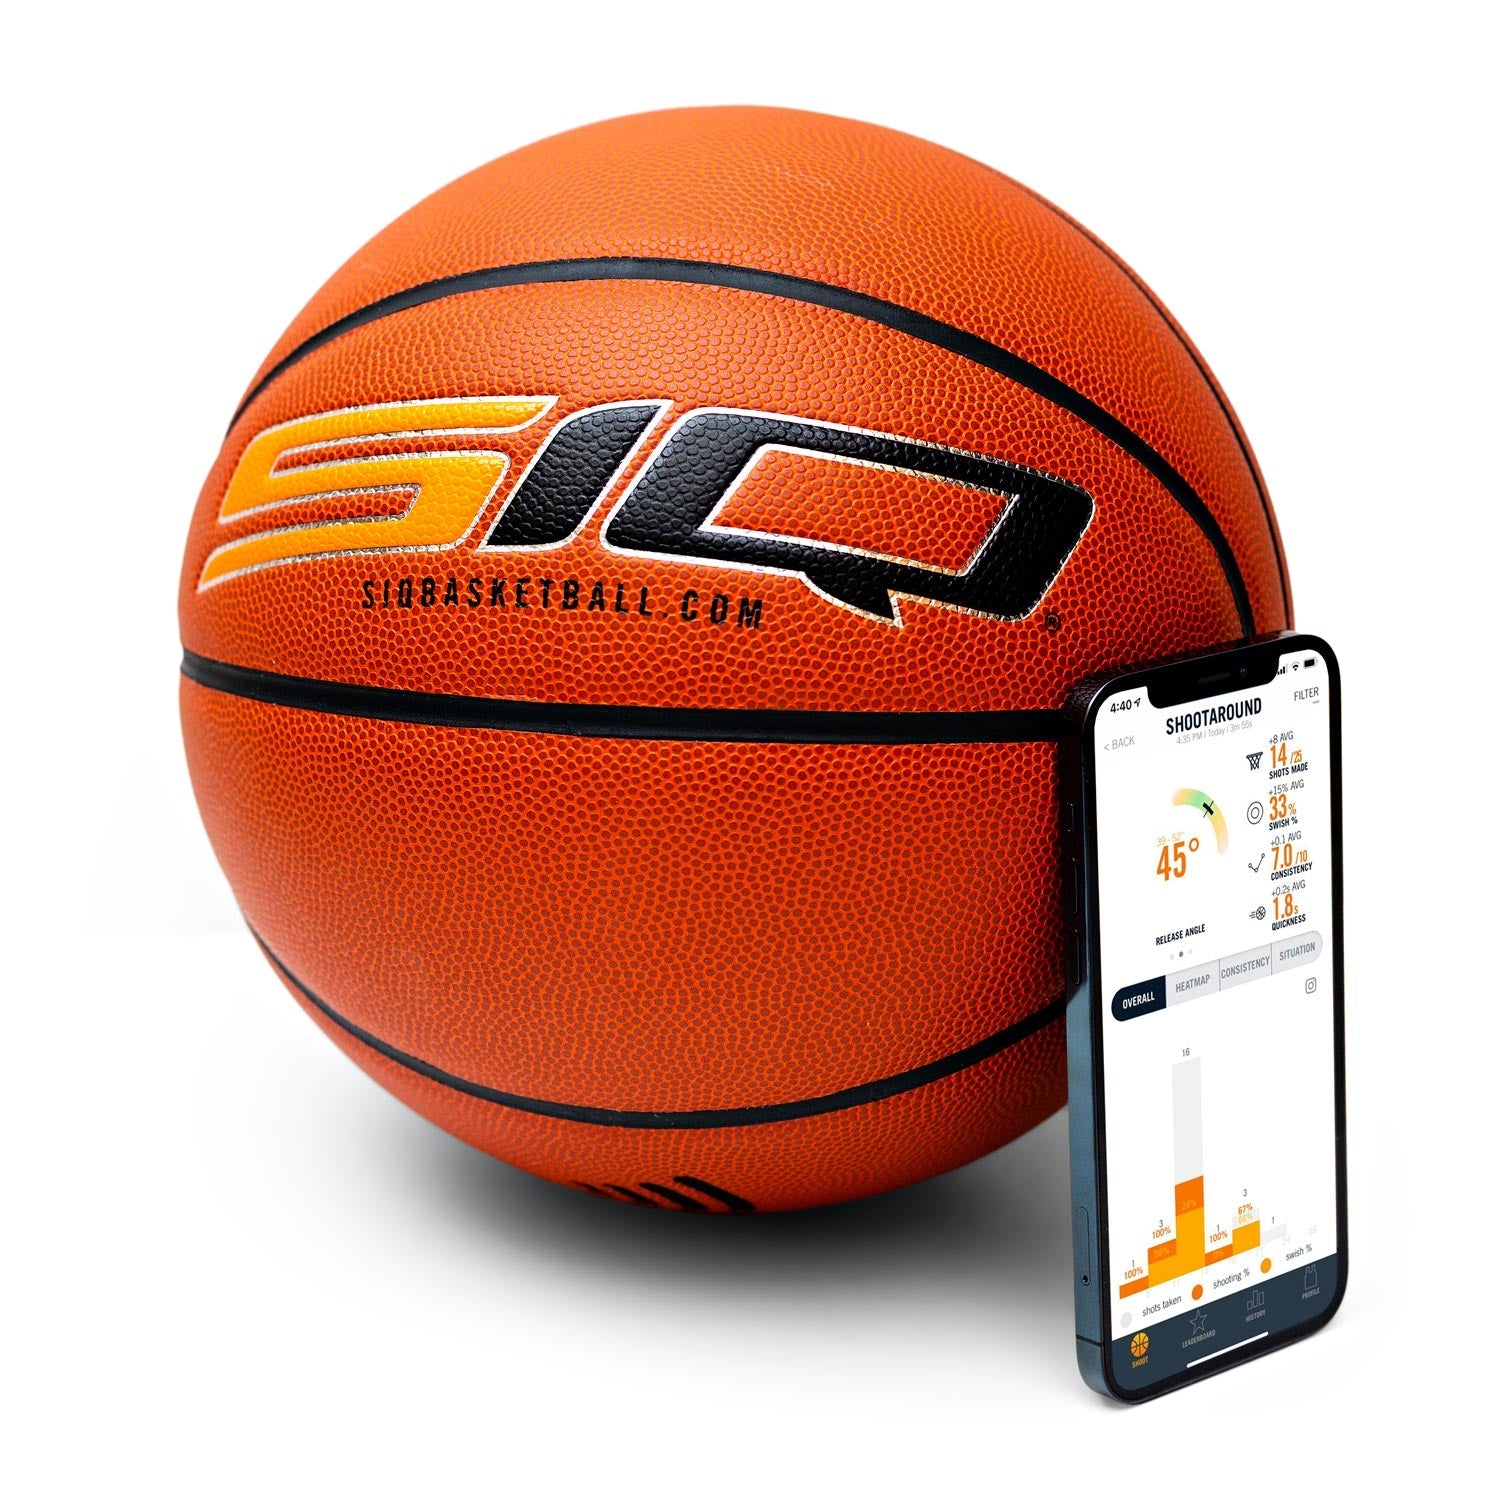 SIQ smart basketball with the SIQ Basketball app displayed on an iPhone